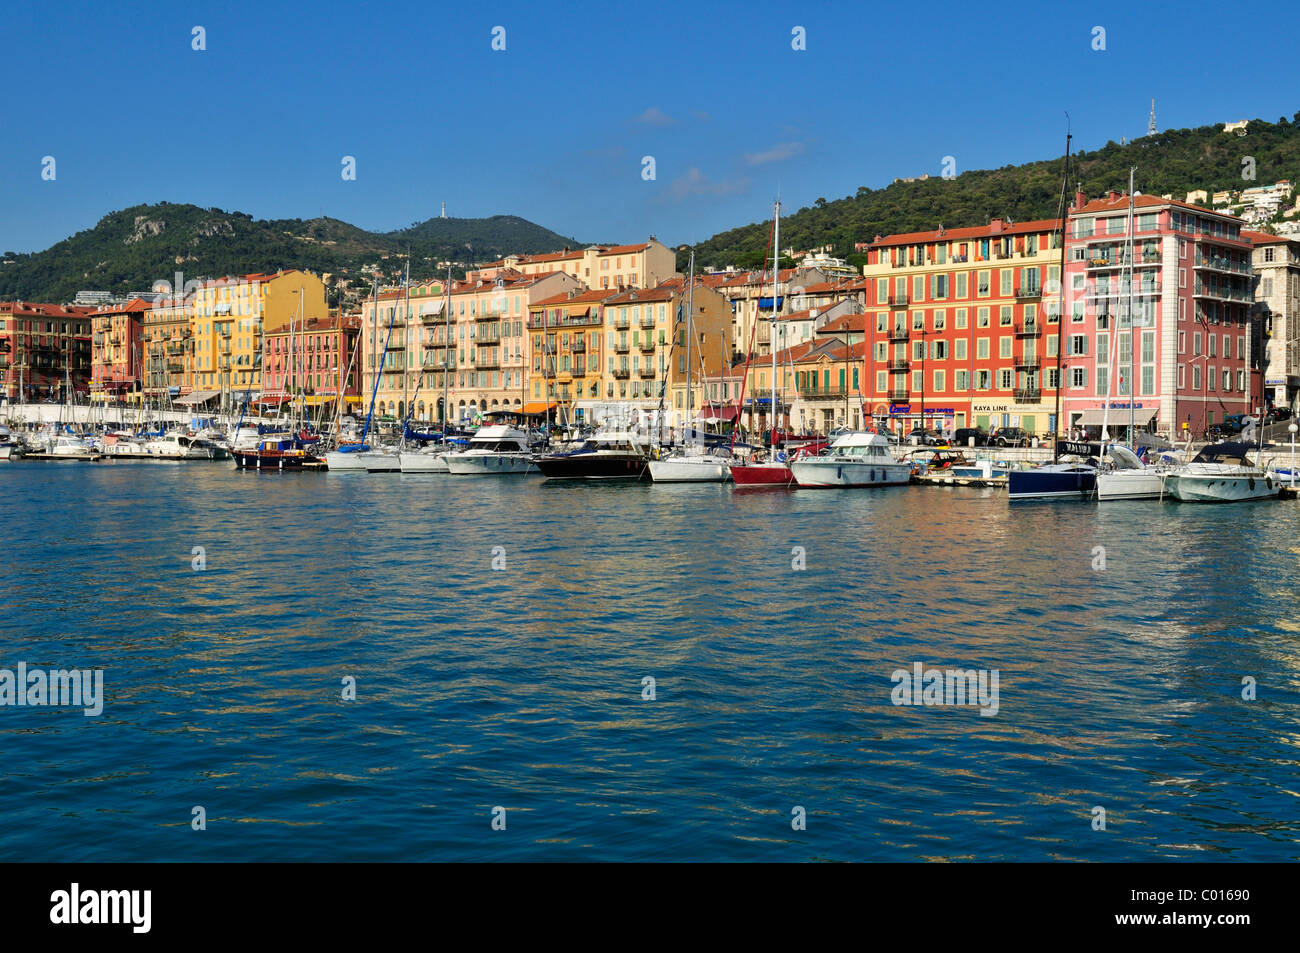 Boats in the harbour of Nice, Nizza, Cote d'Azur, Alpes Maritimes, Provence, France, Europe Stock Photo